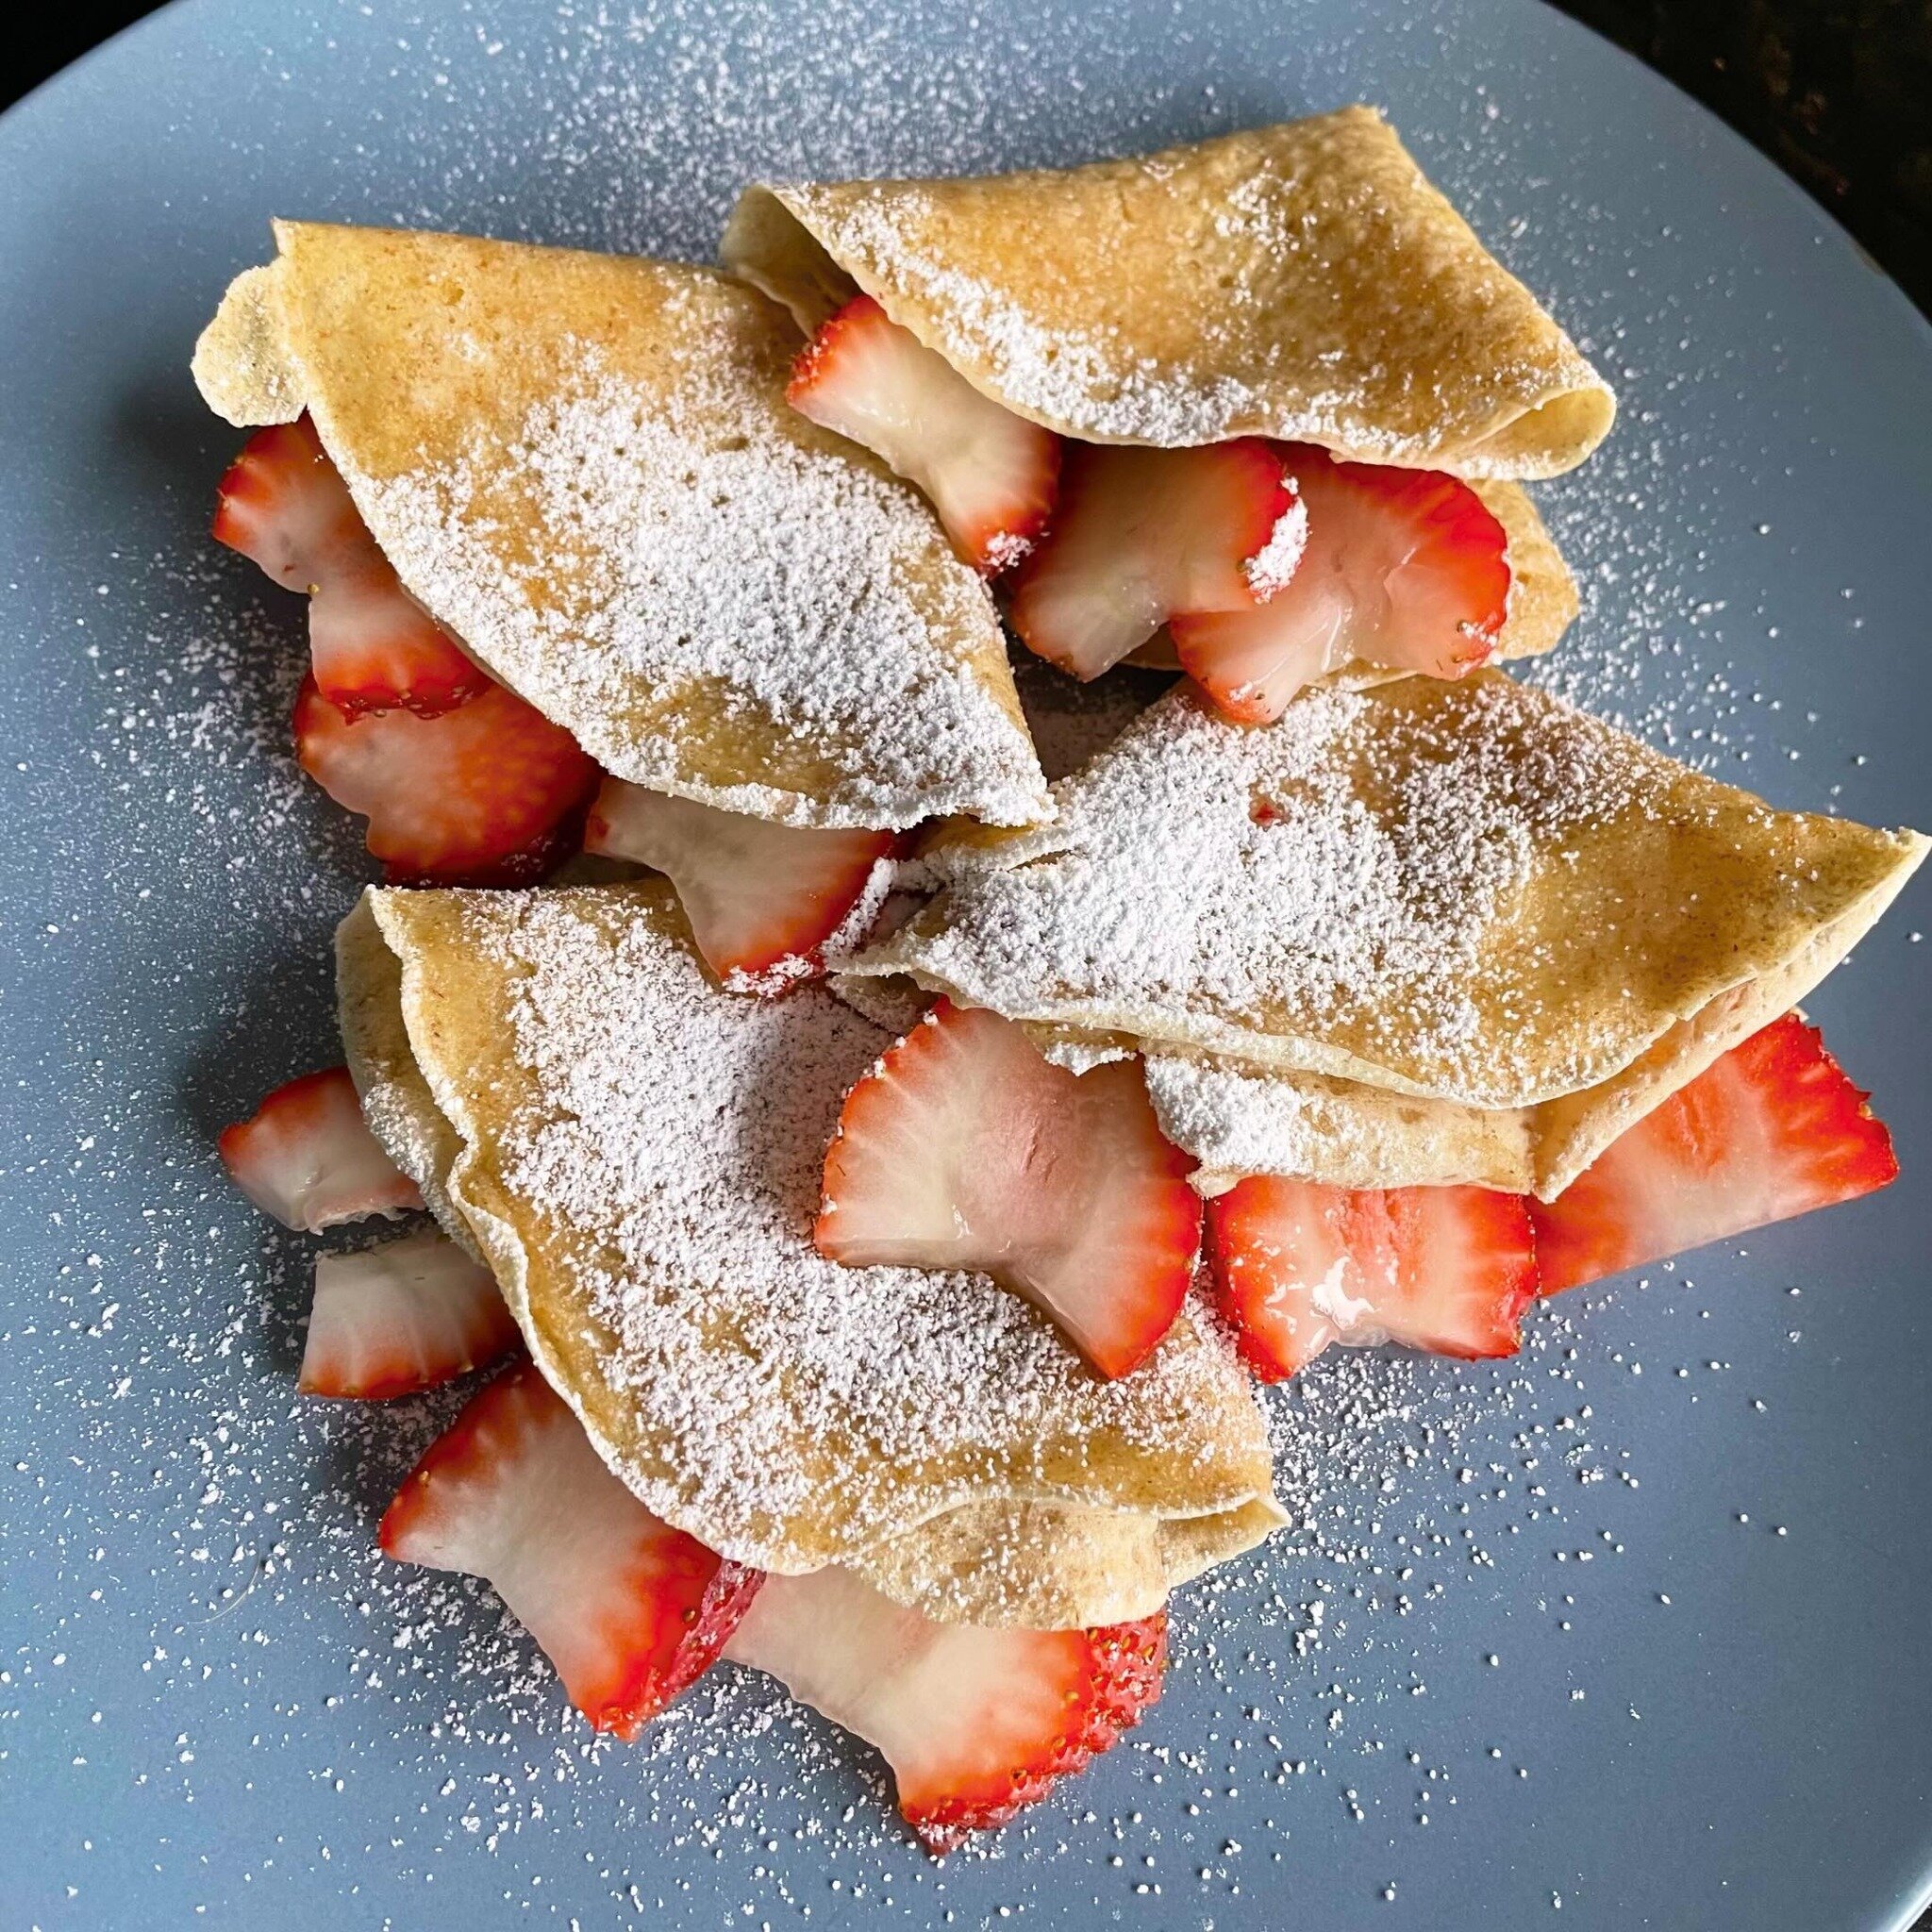 Interested in trying our locally grown, fresh milled flours, but not sure what to make with them? We&rsquo;ve got recipes for you on our website, link in bio. These Rouge de Bordeaux crepes were just added today!